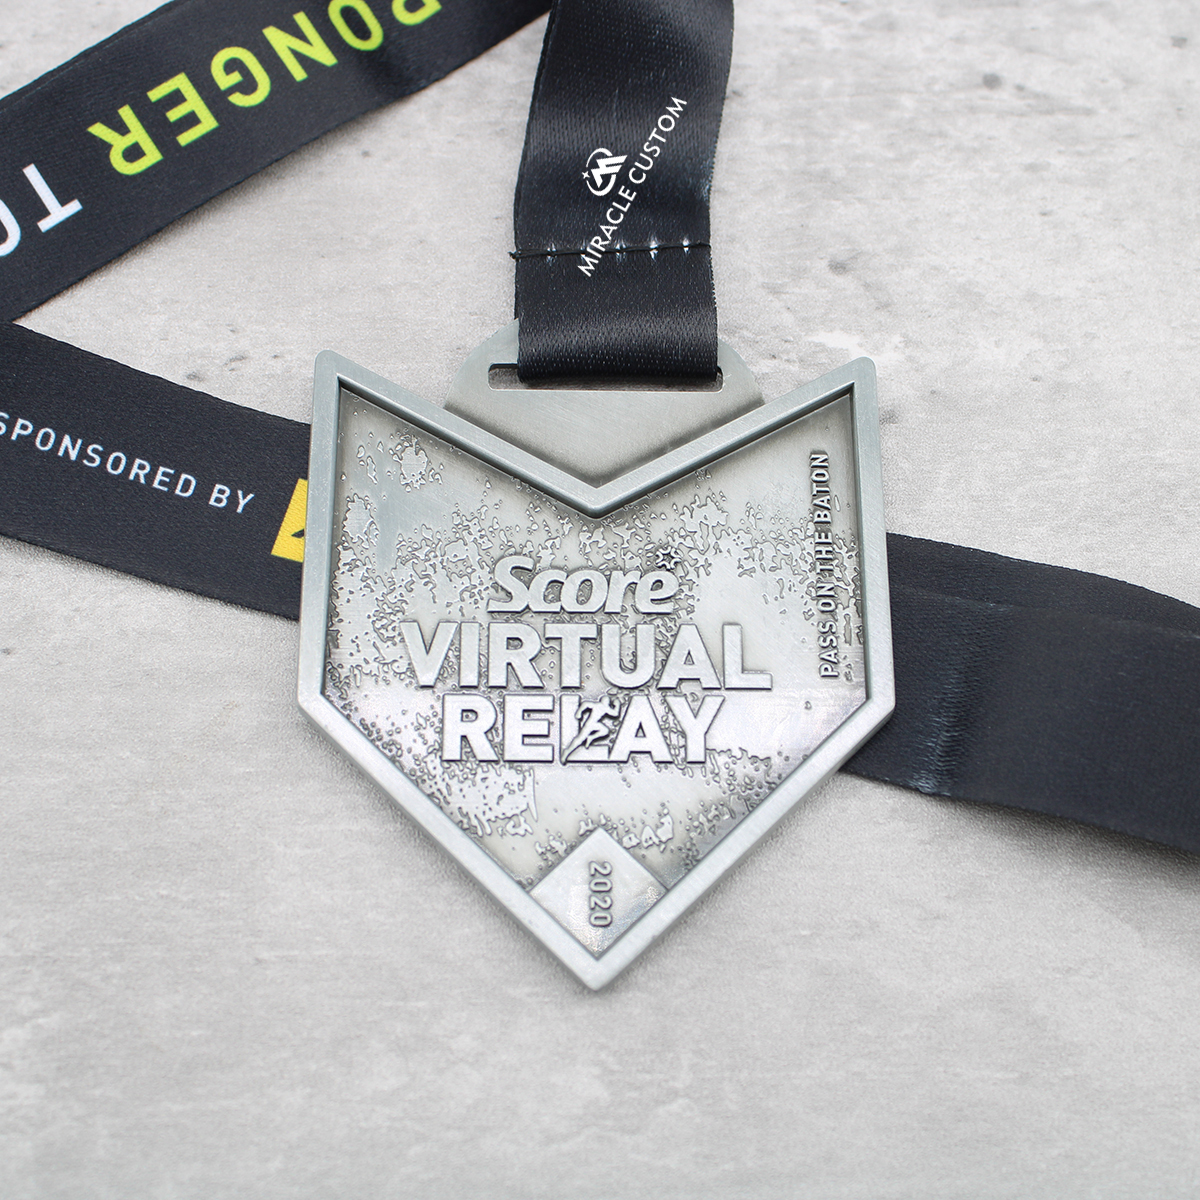 Virtual Run Medal Score Virtual Relay 2020 Finisher Medal Edition Event